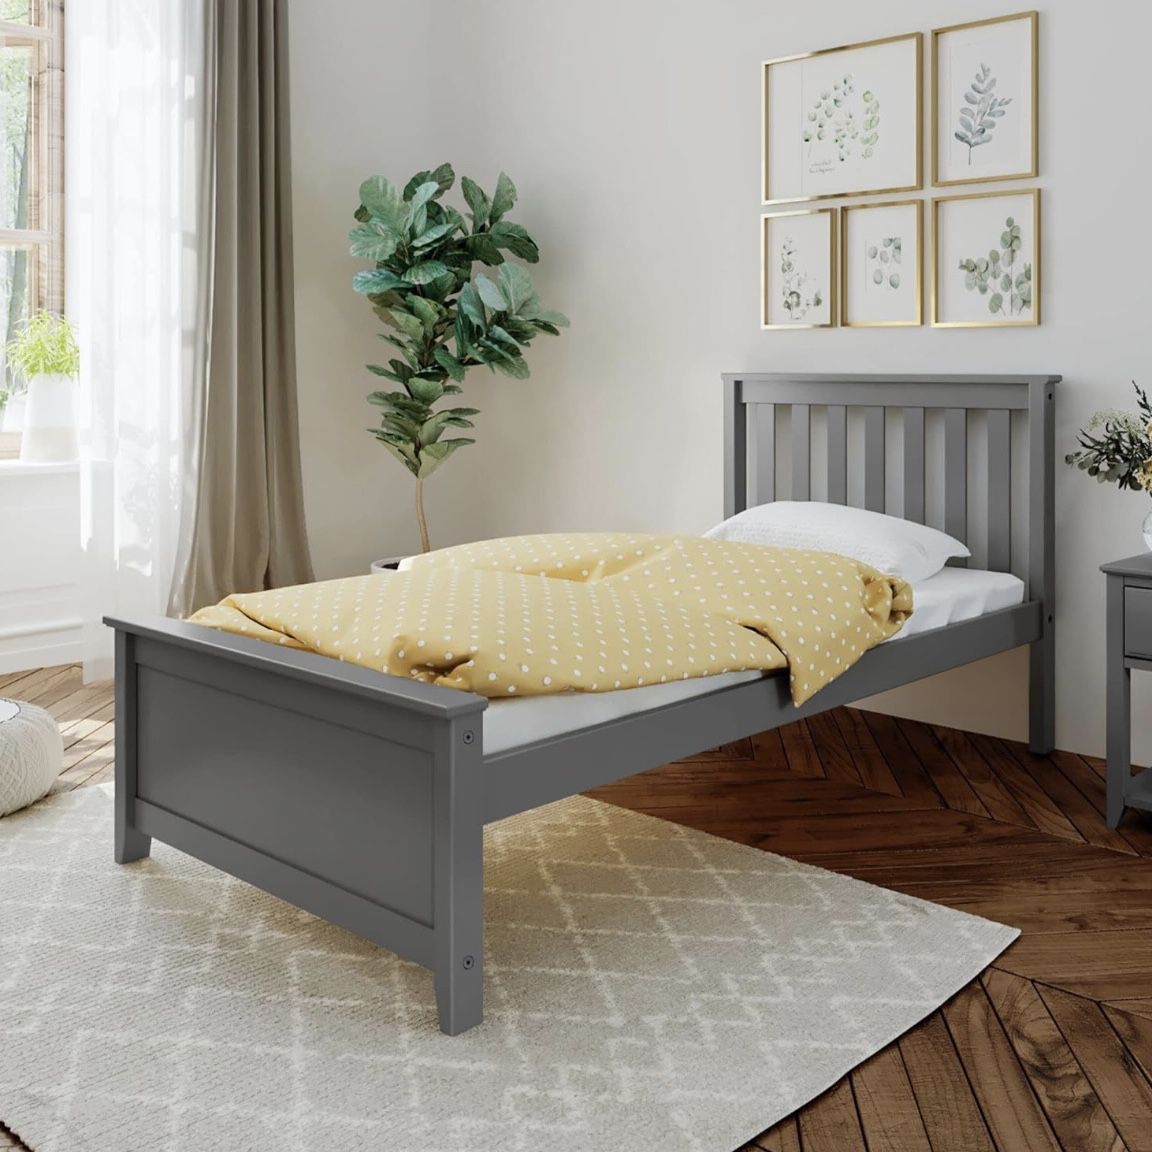 29-55 Max & Lily Twin Bed Frame with Slatted Headboard, Solid Wood Platform Bed for Kids, No Box Spring Needed, Easy Assembly, Grey